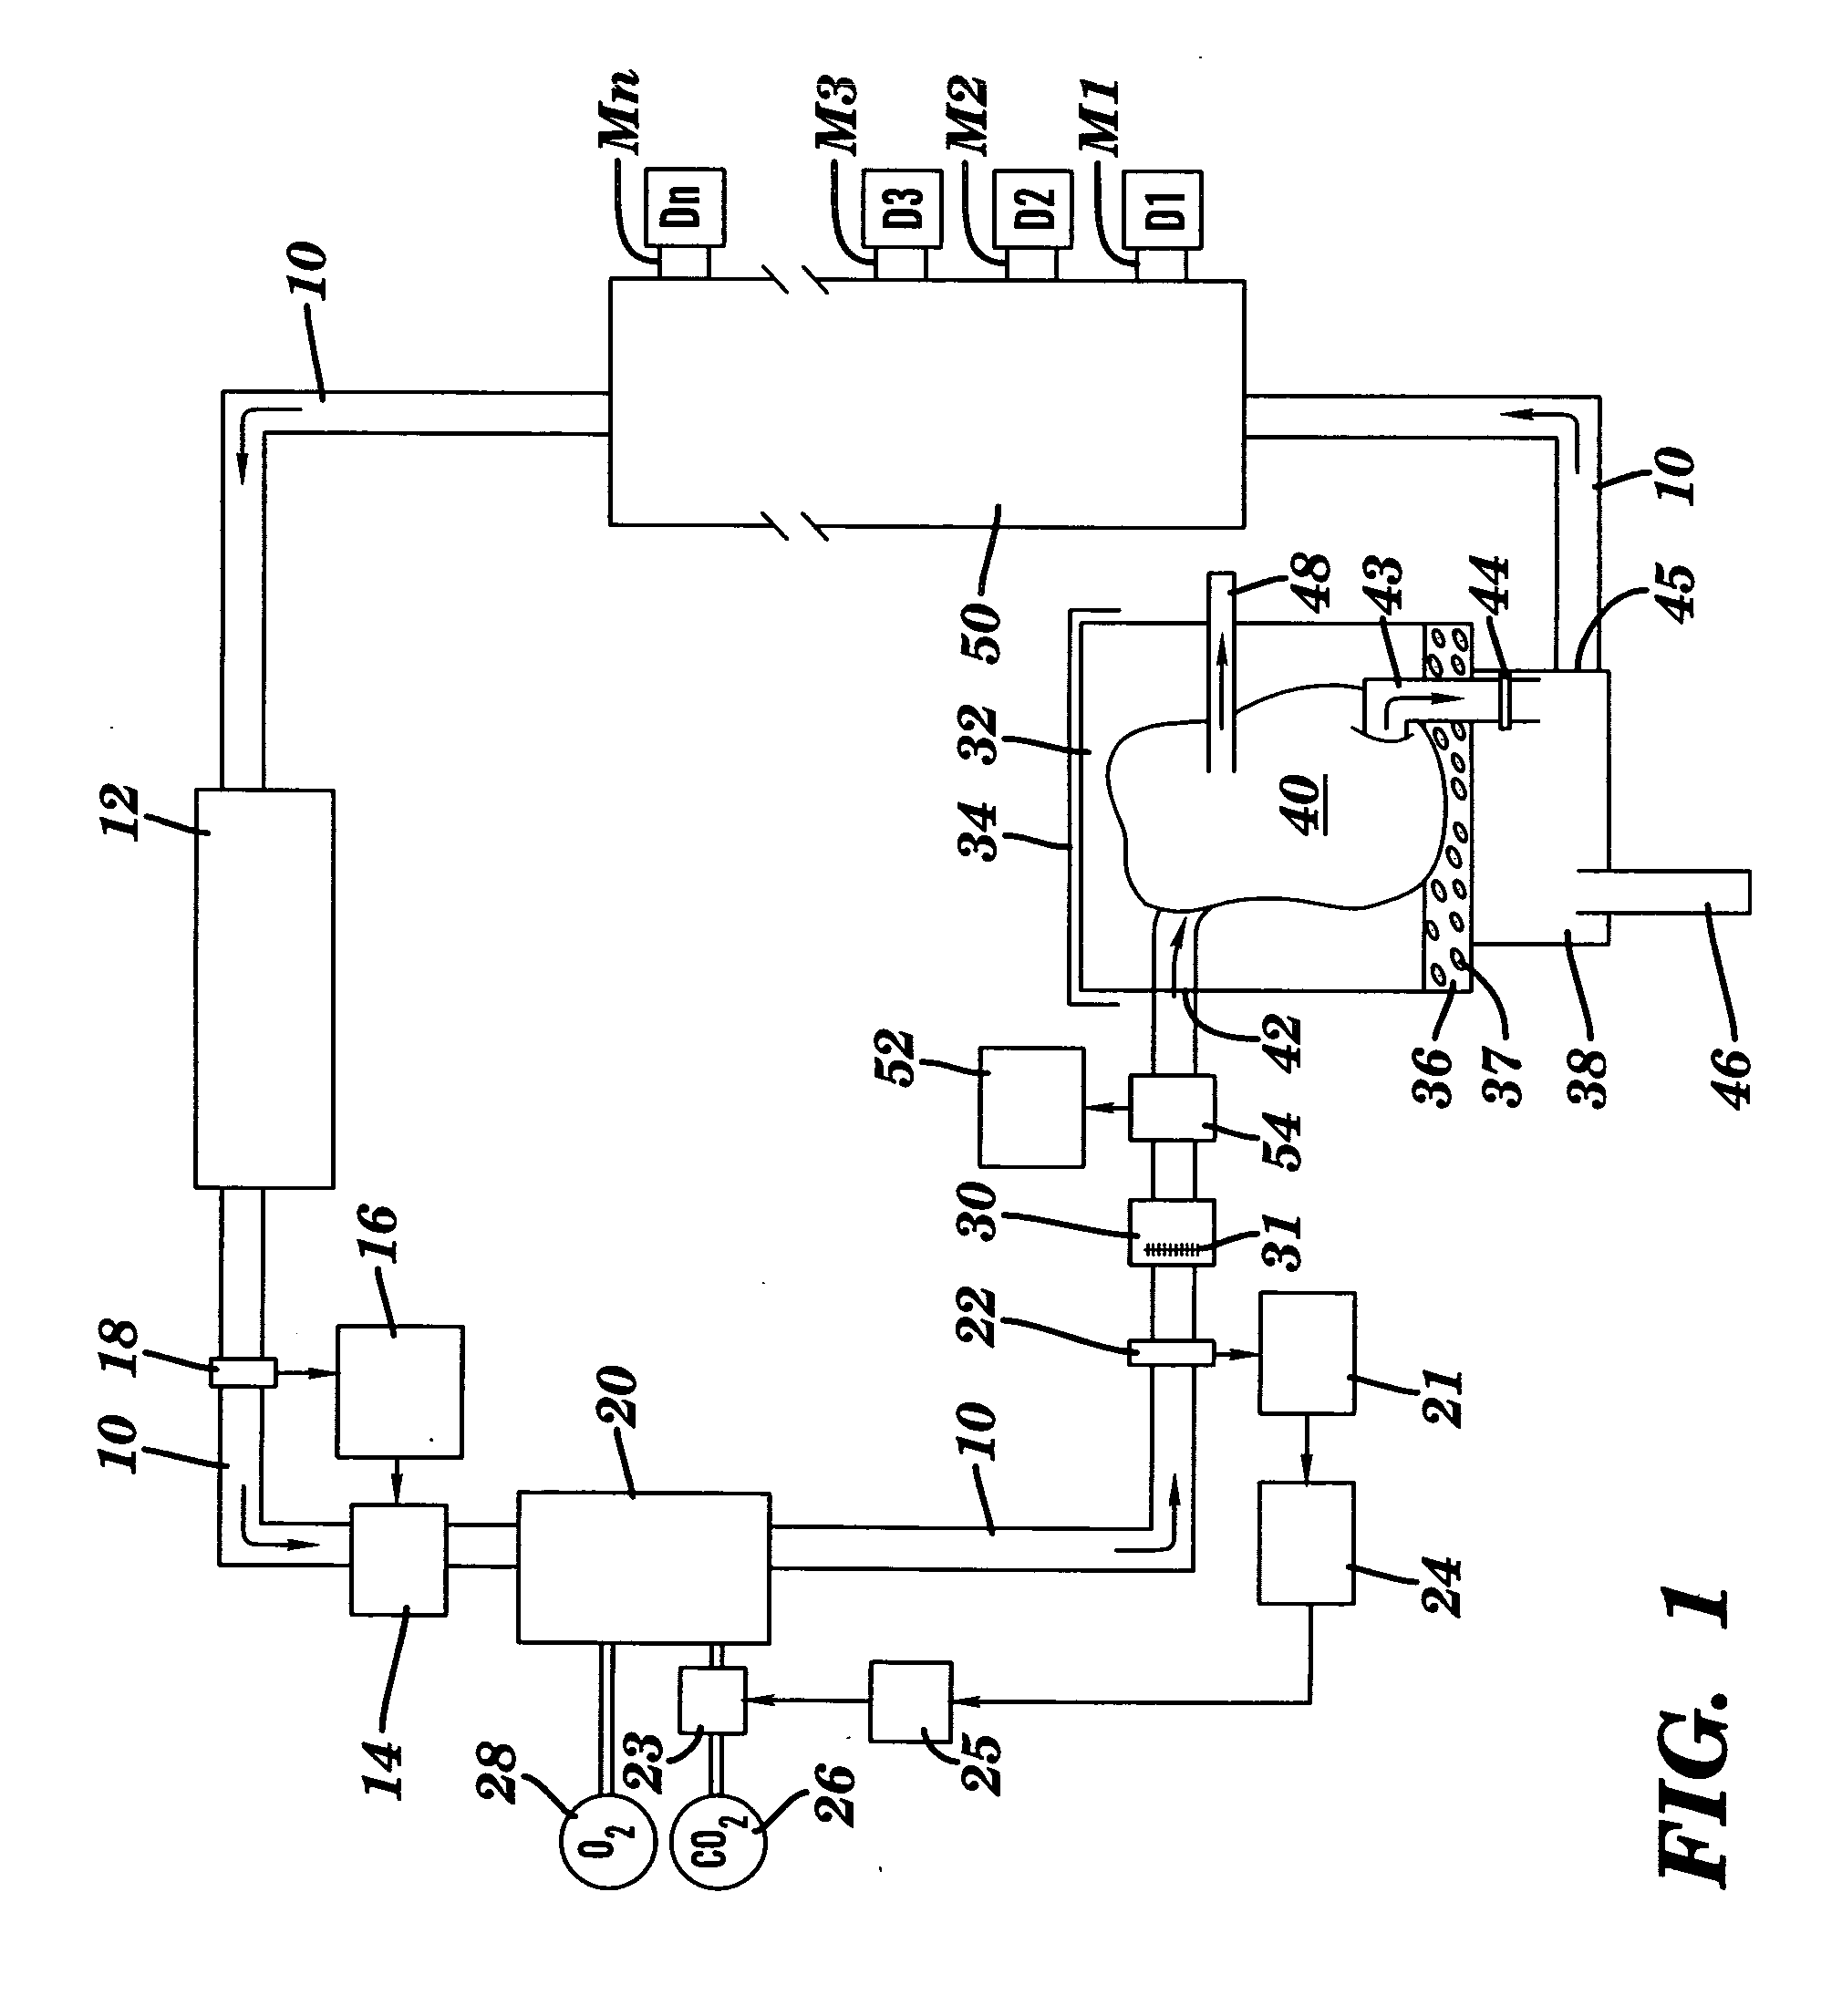 System for exsanguinous metabolic support of an organ or tissue